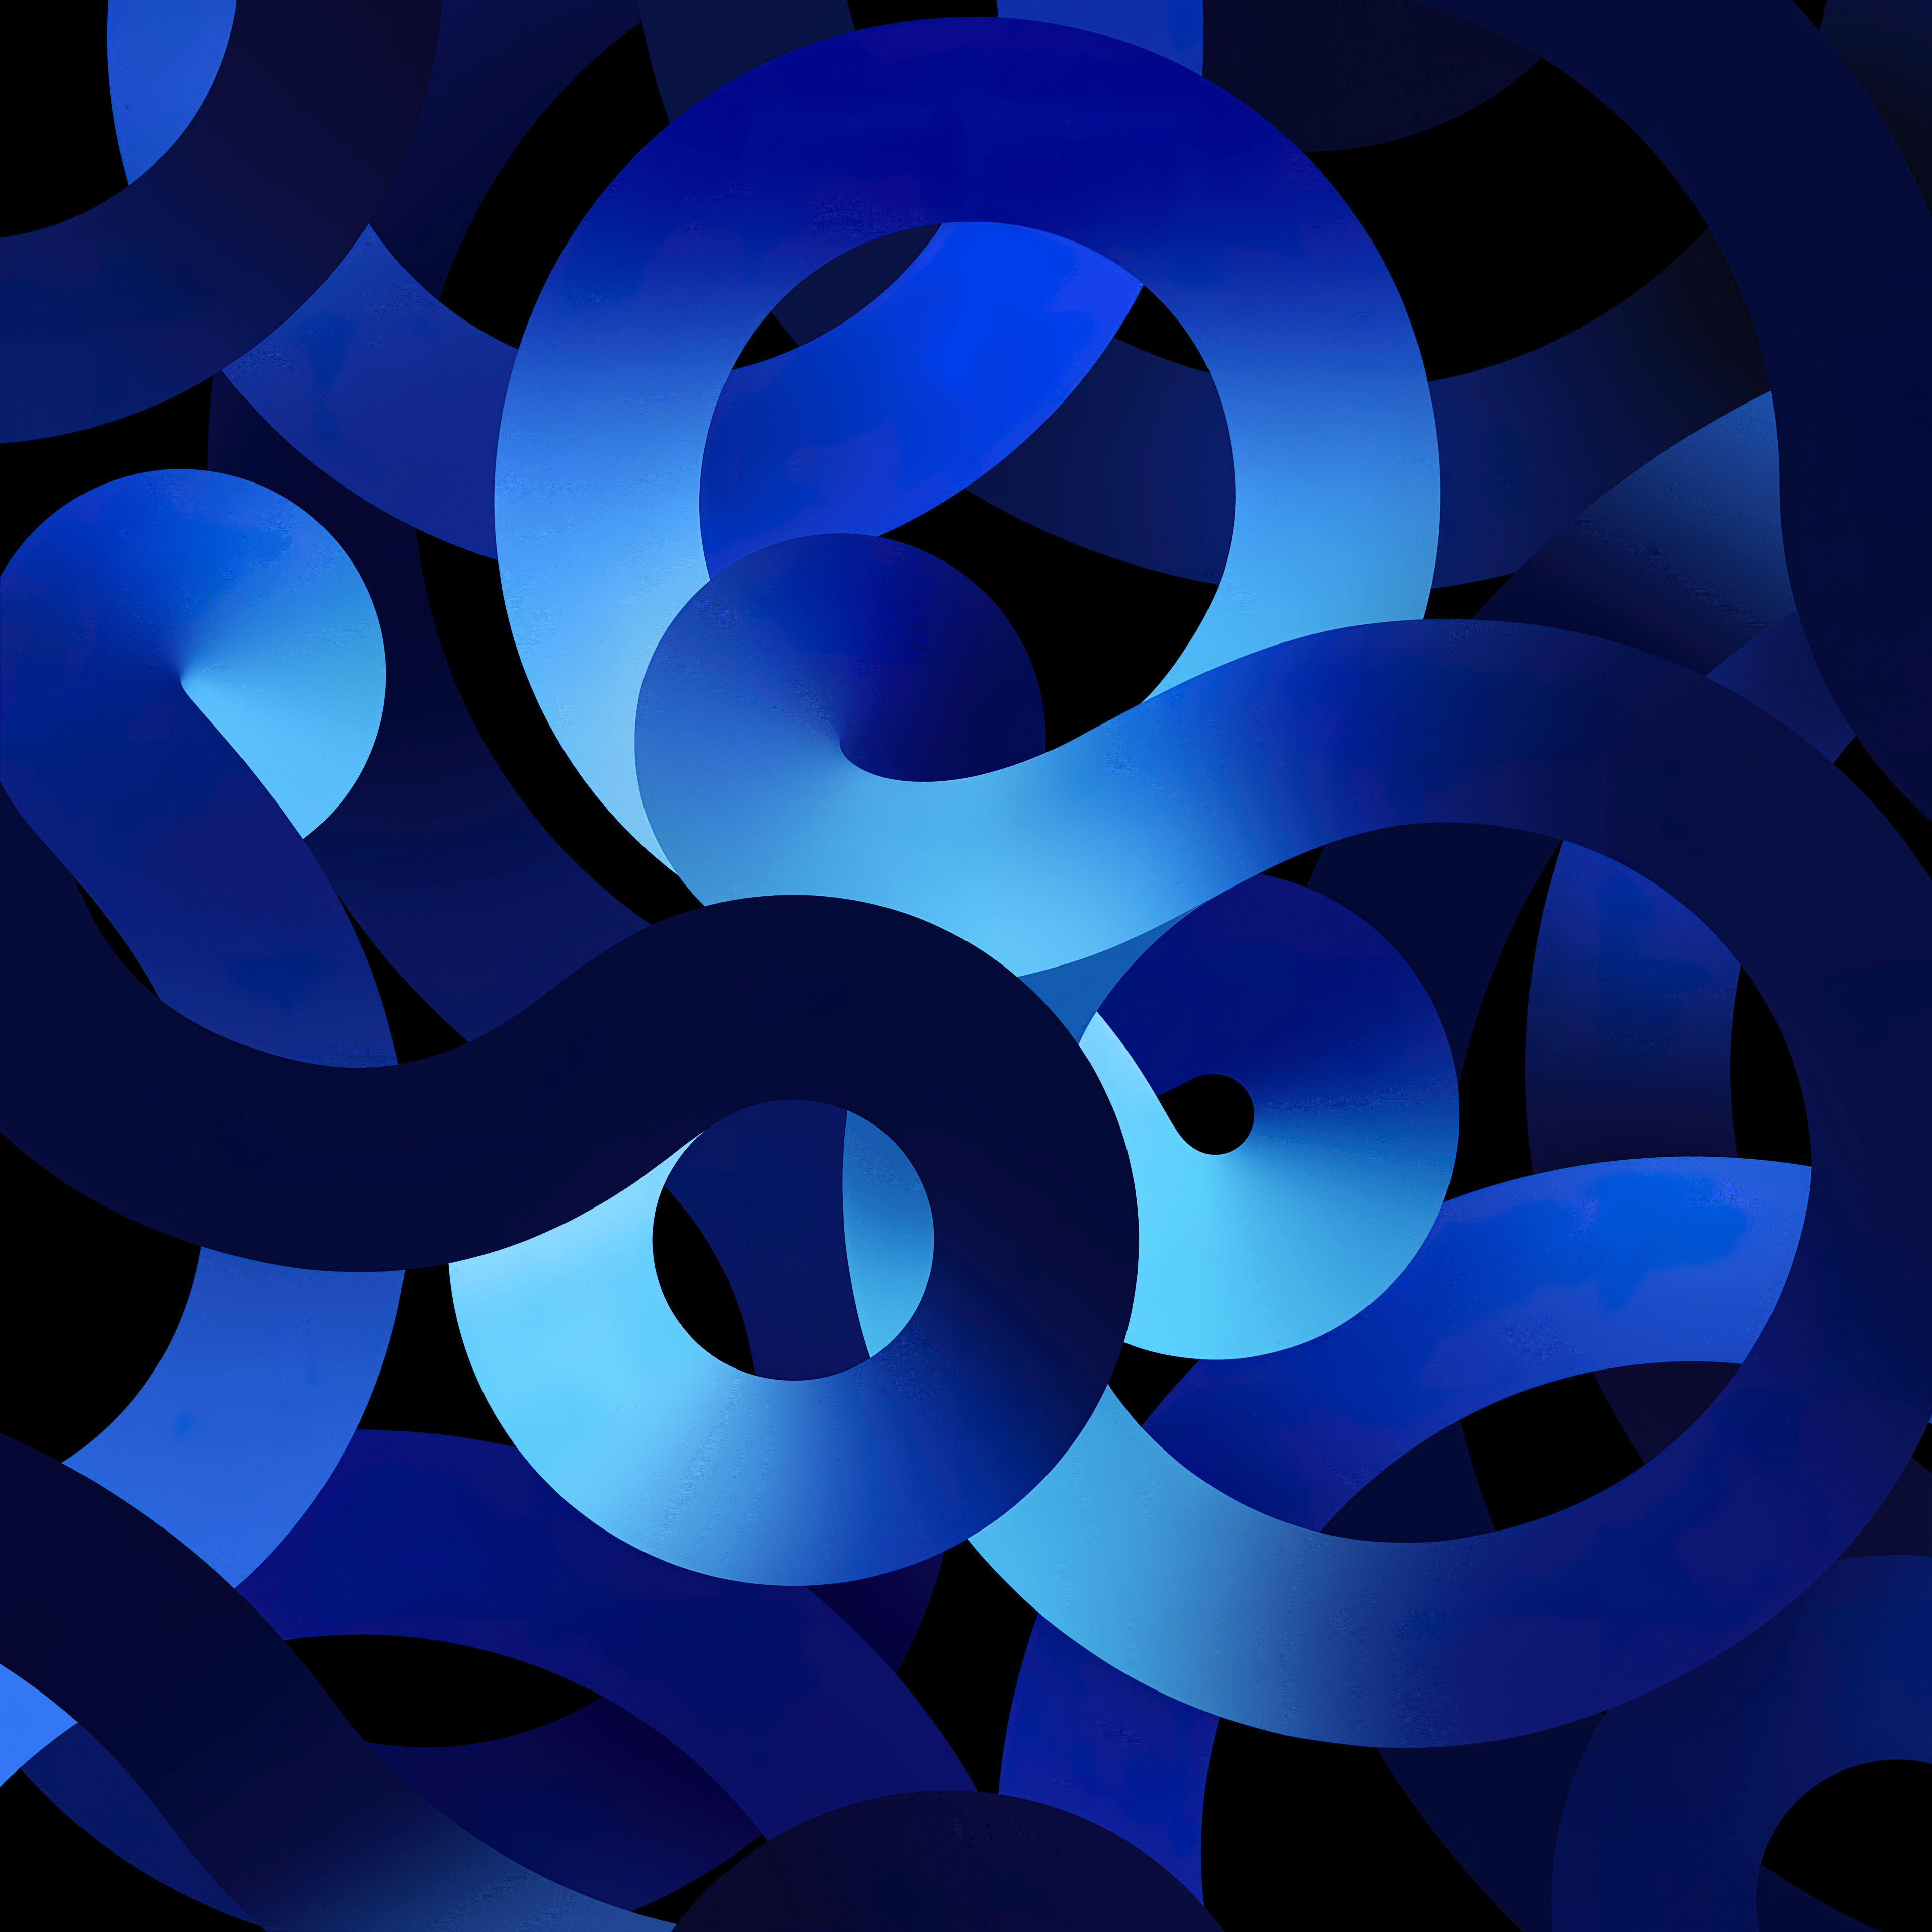 A blue abstract pattern of interlocking shapes on a black background. - Low poly, blue, dark blue, Windows 10